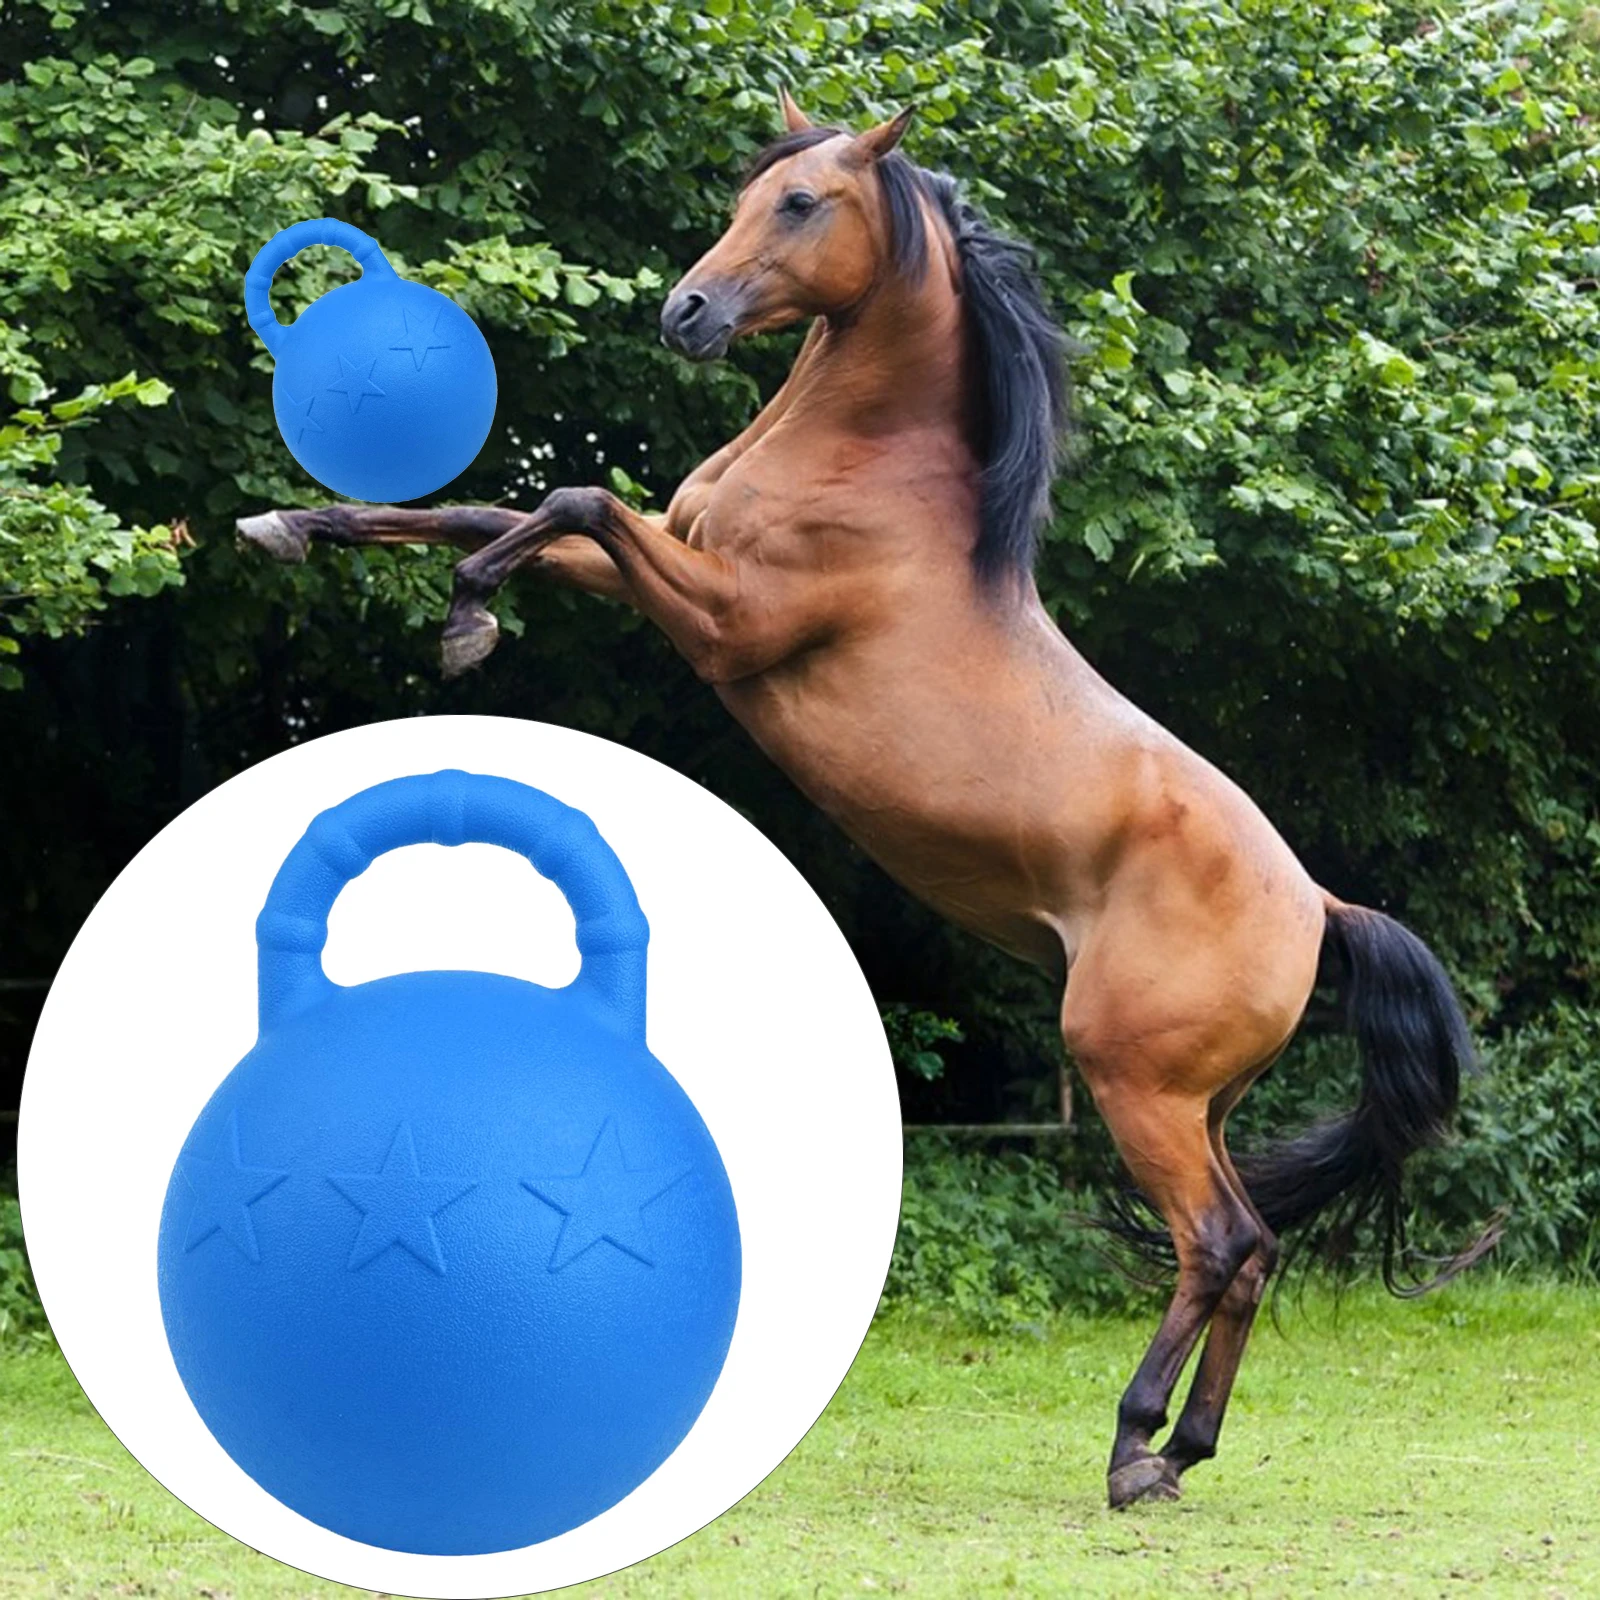 Horses Play Game Toy, Fruit Scented Anti-Burst  Soccer Balls for Training Horse  Dog Training Toy Soccer Ball